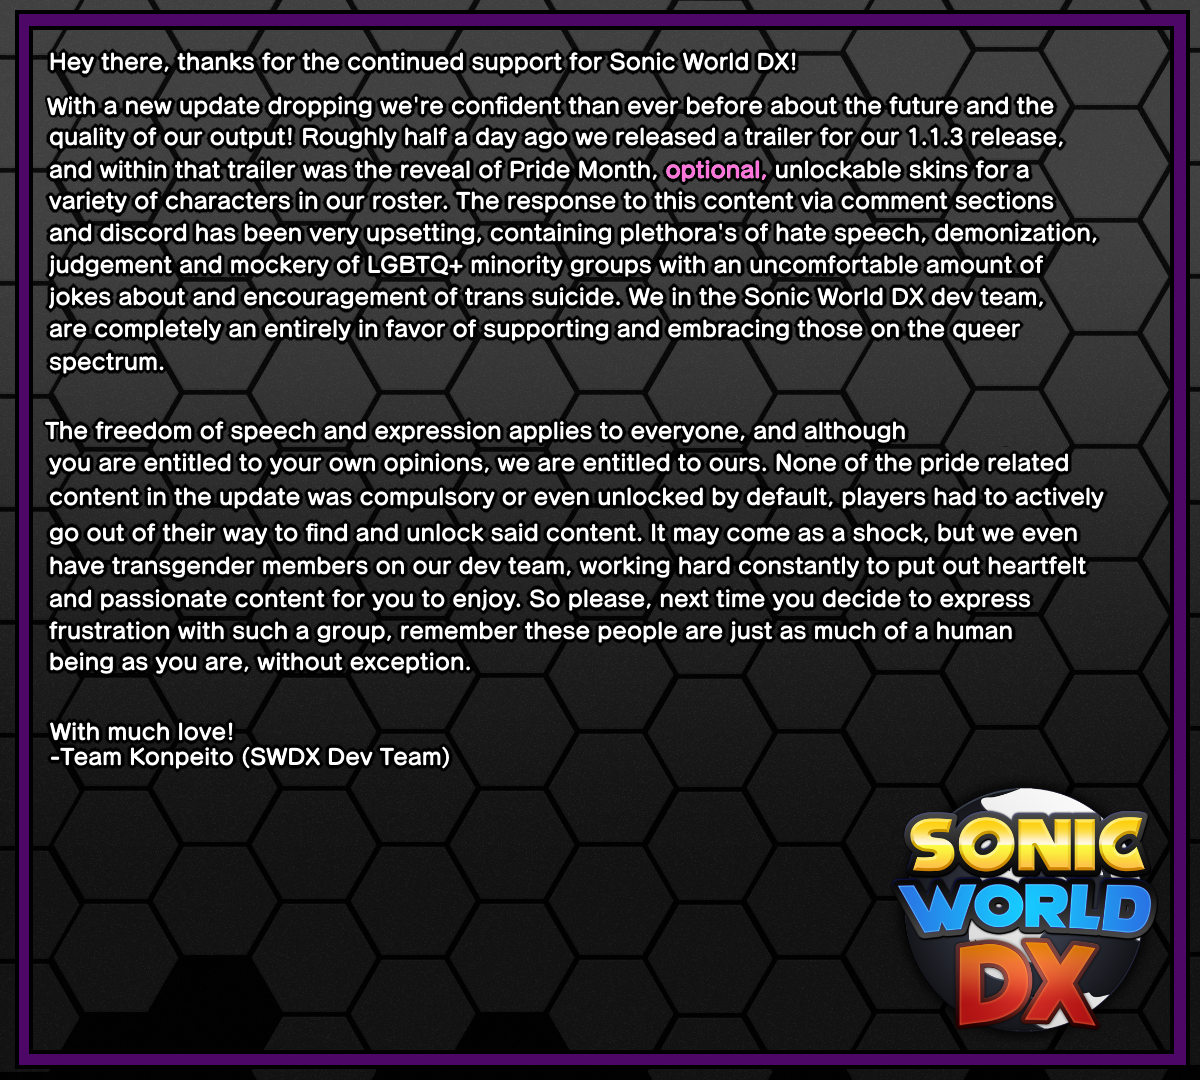 Fangame] Sonic Chaos Ripping Project